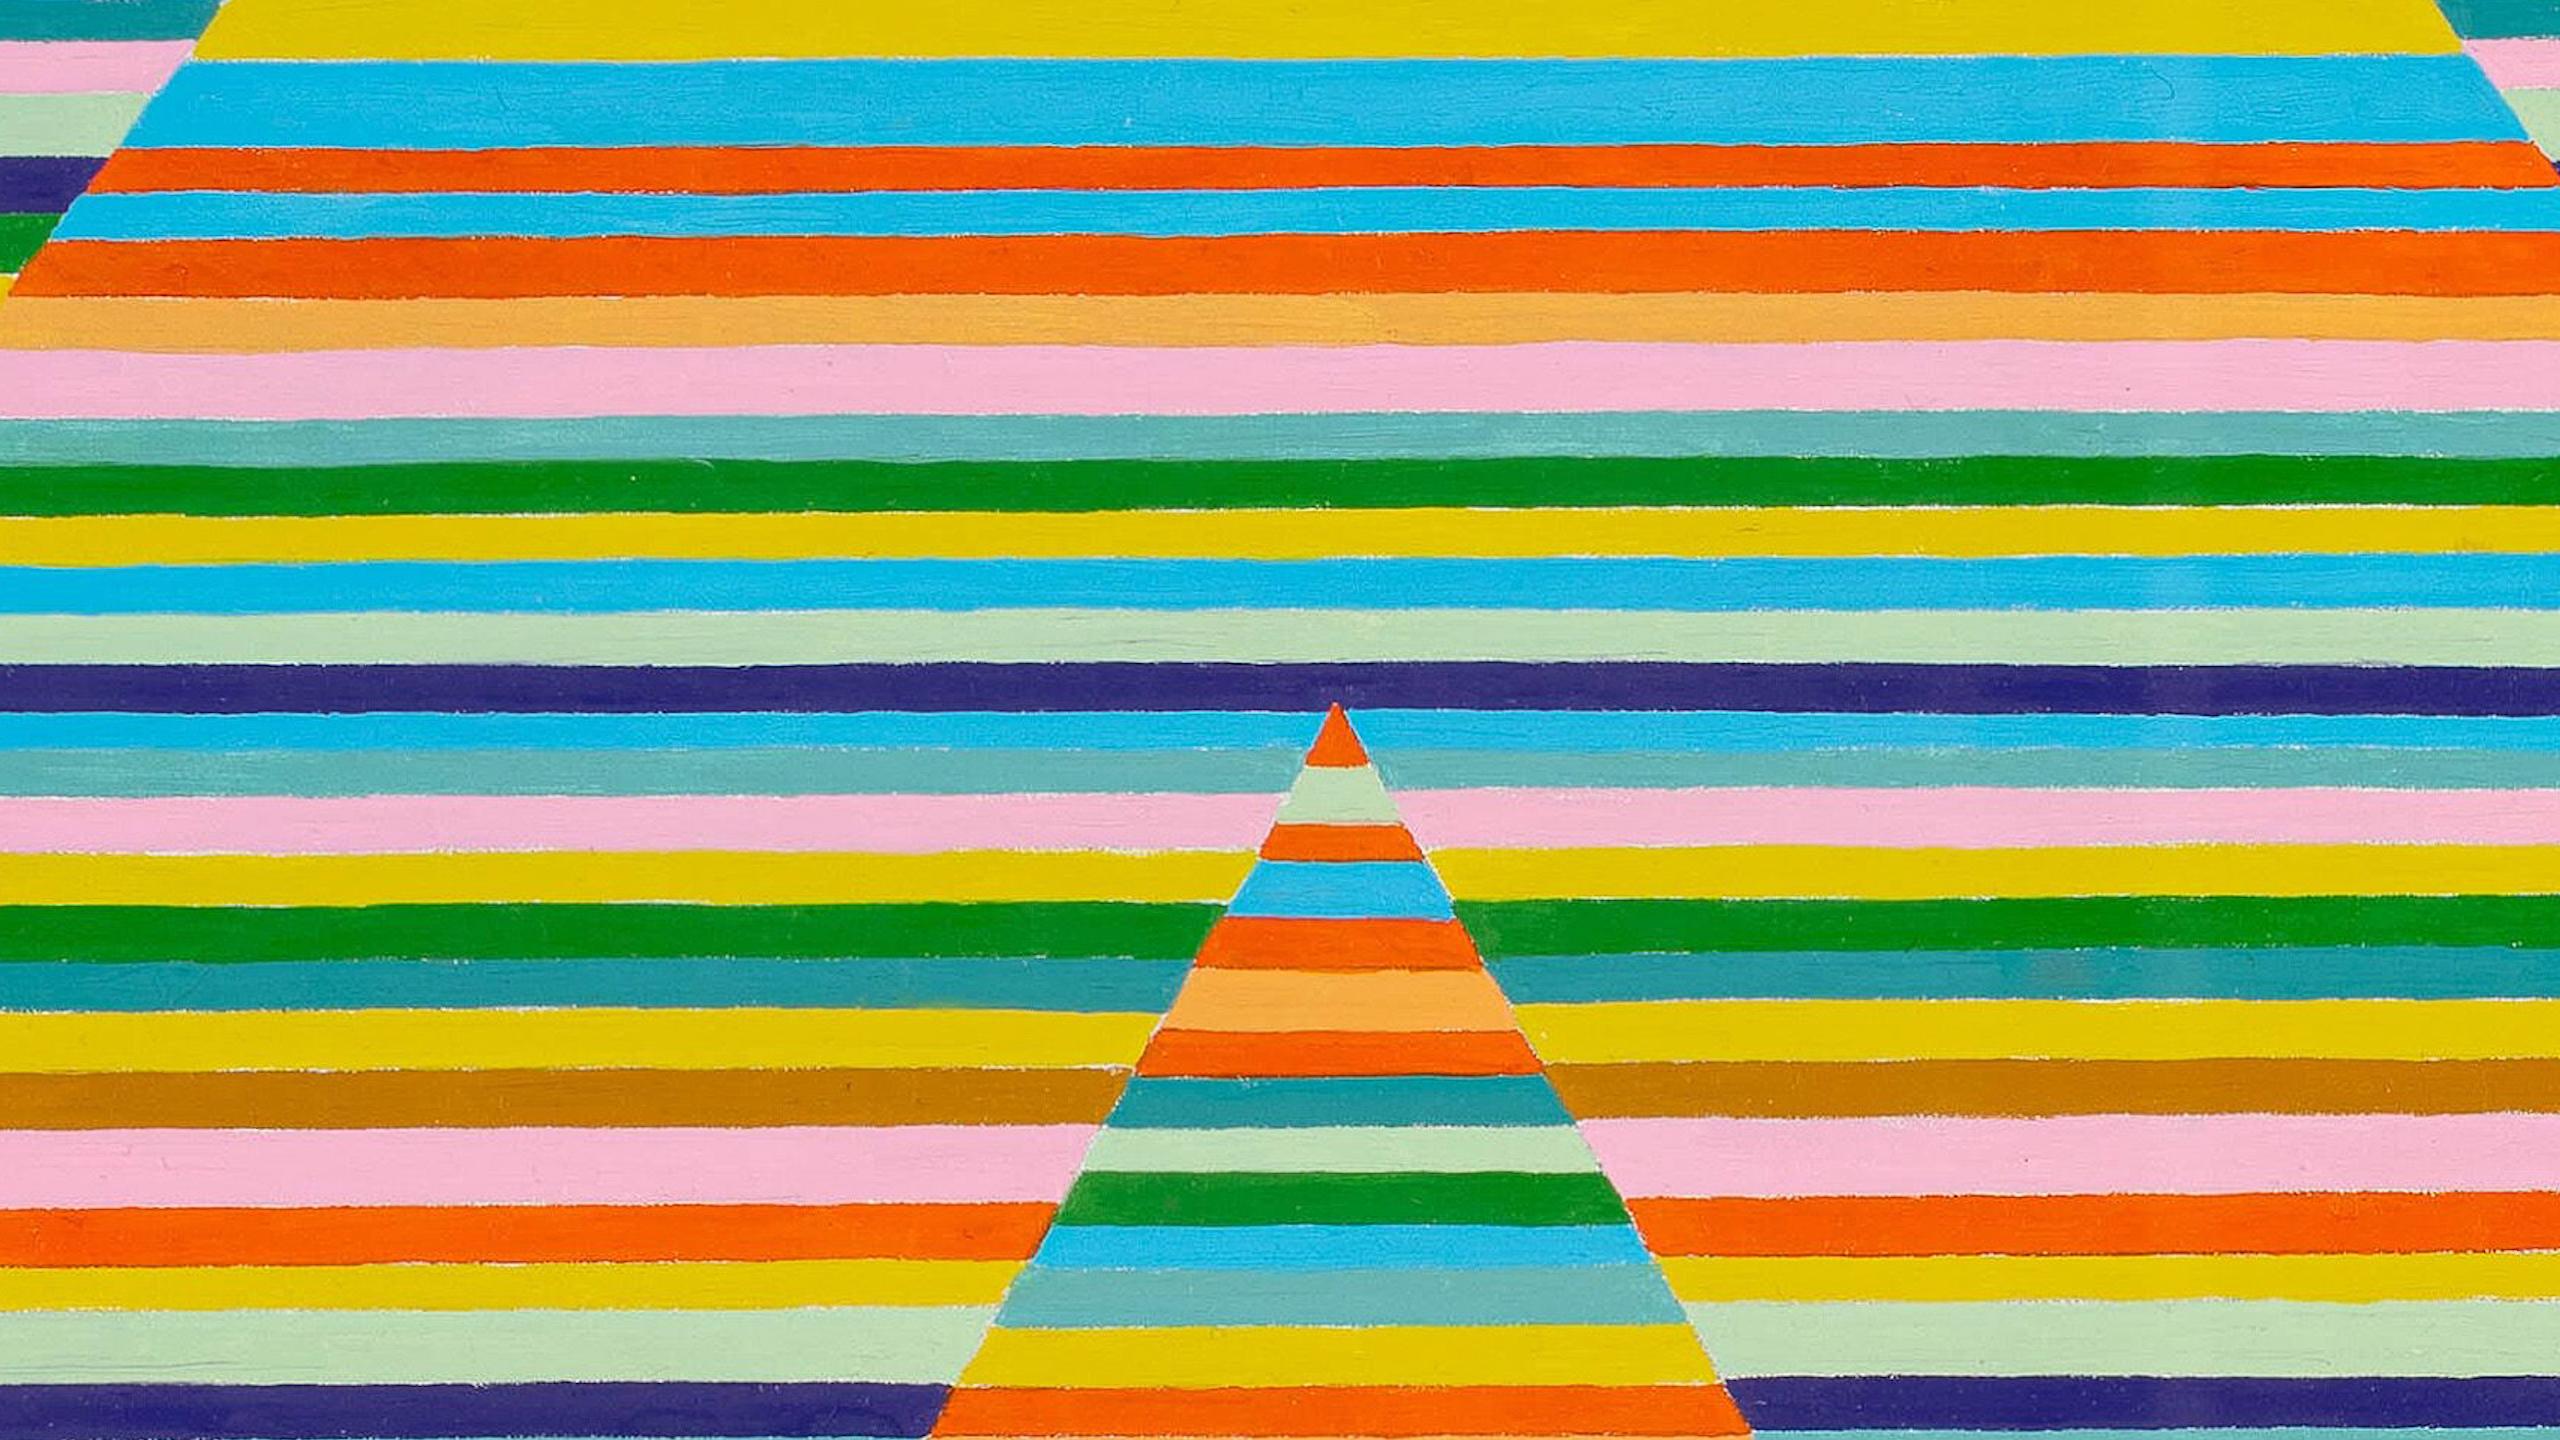 Double Pyramid Thought Form - Abstract Geometric Art by Matt Magee